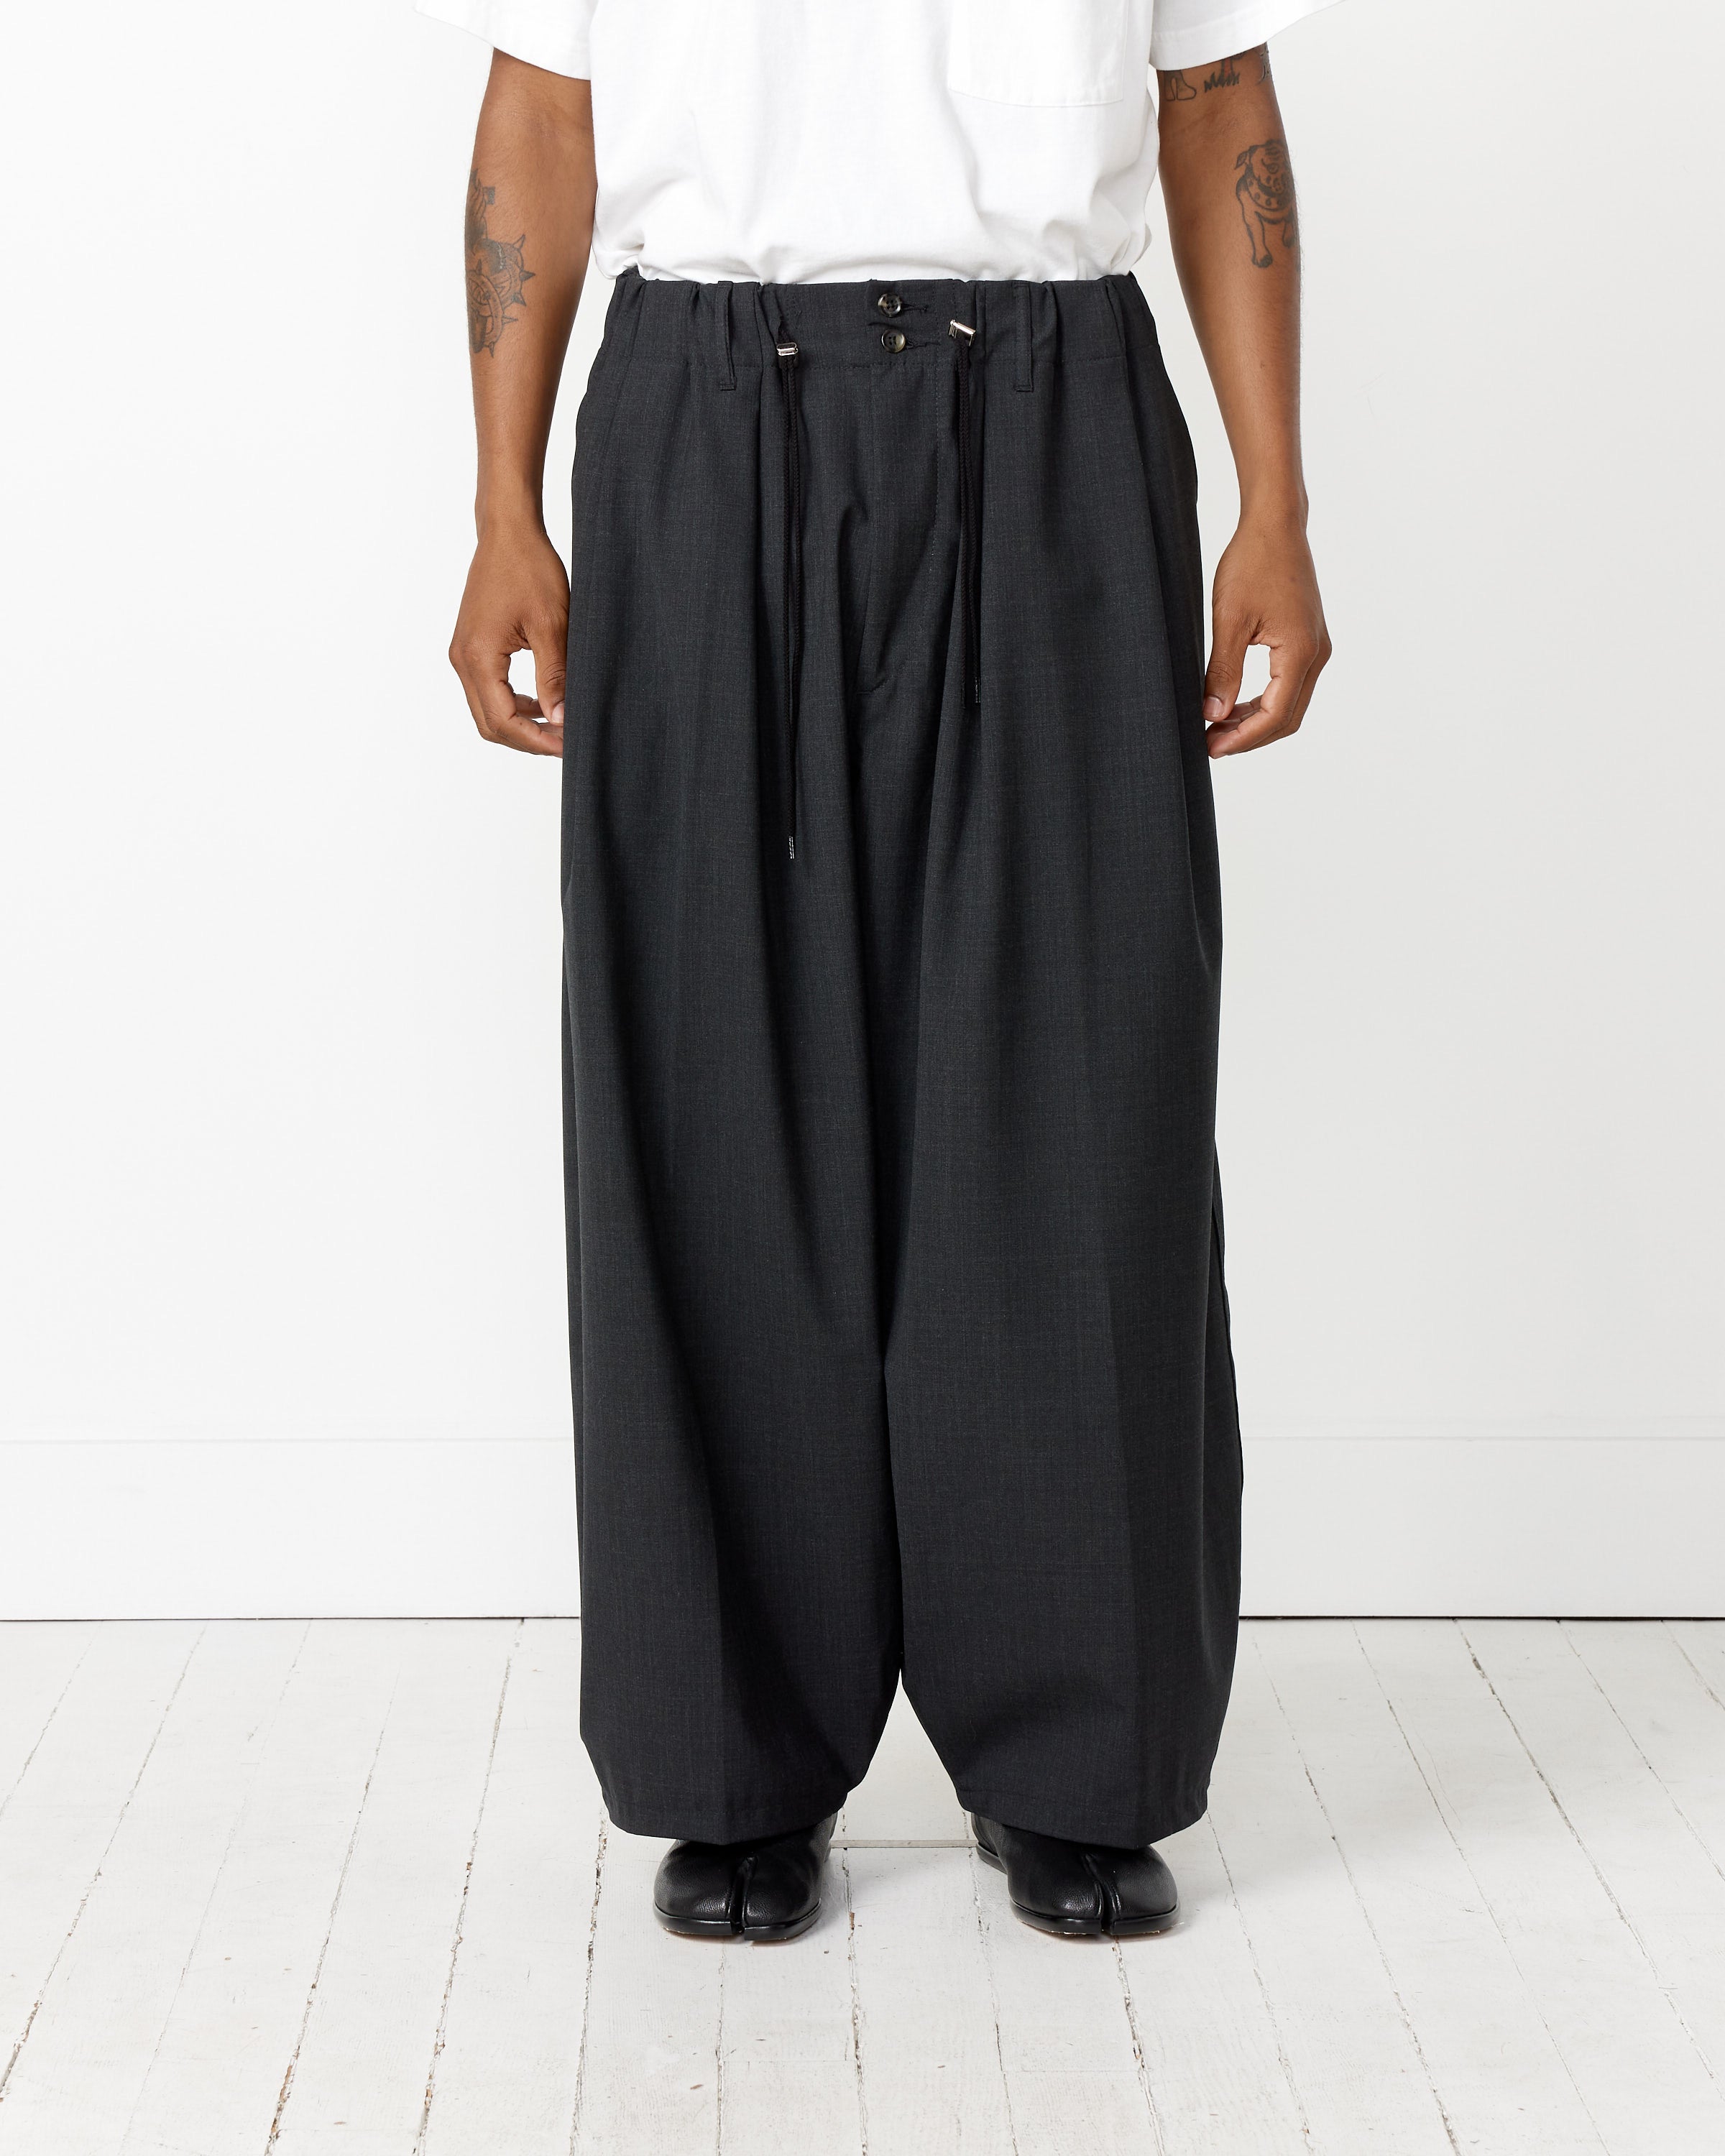 Mohawk General Store | Sillage | Essential Circular Pants in Anthracite